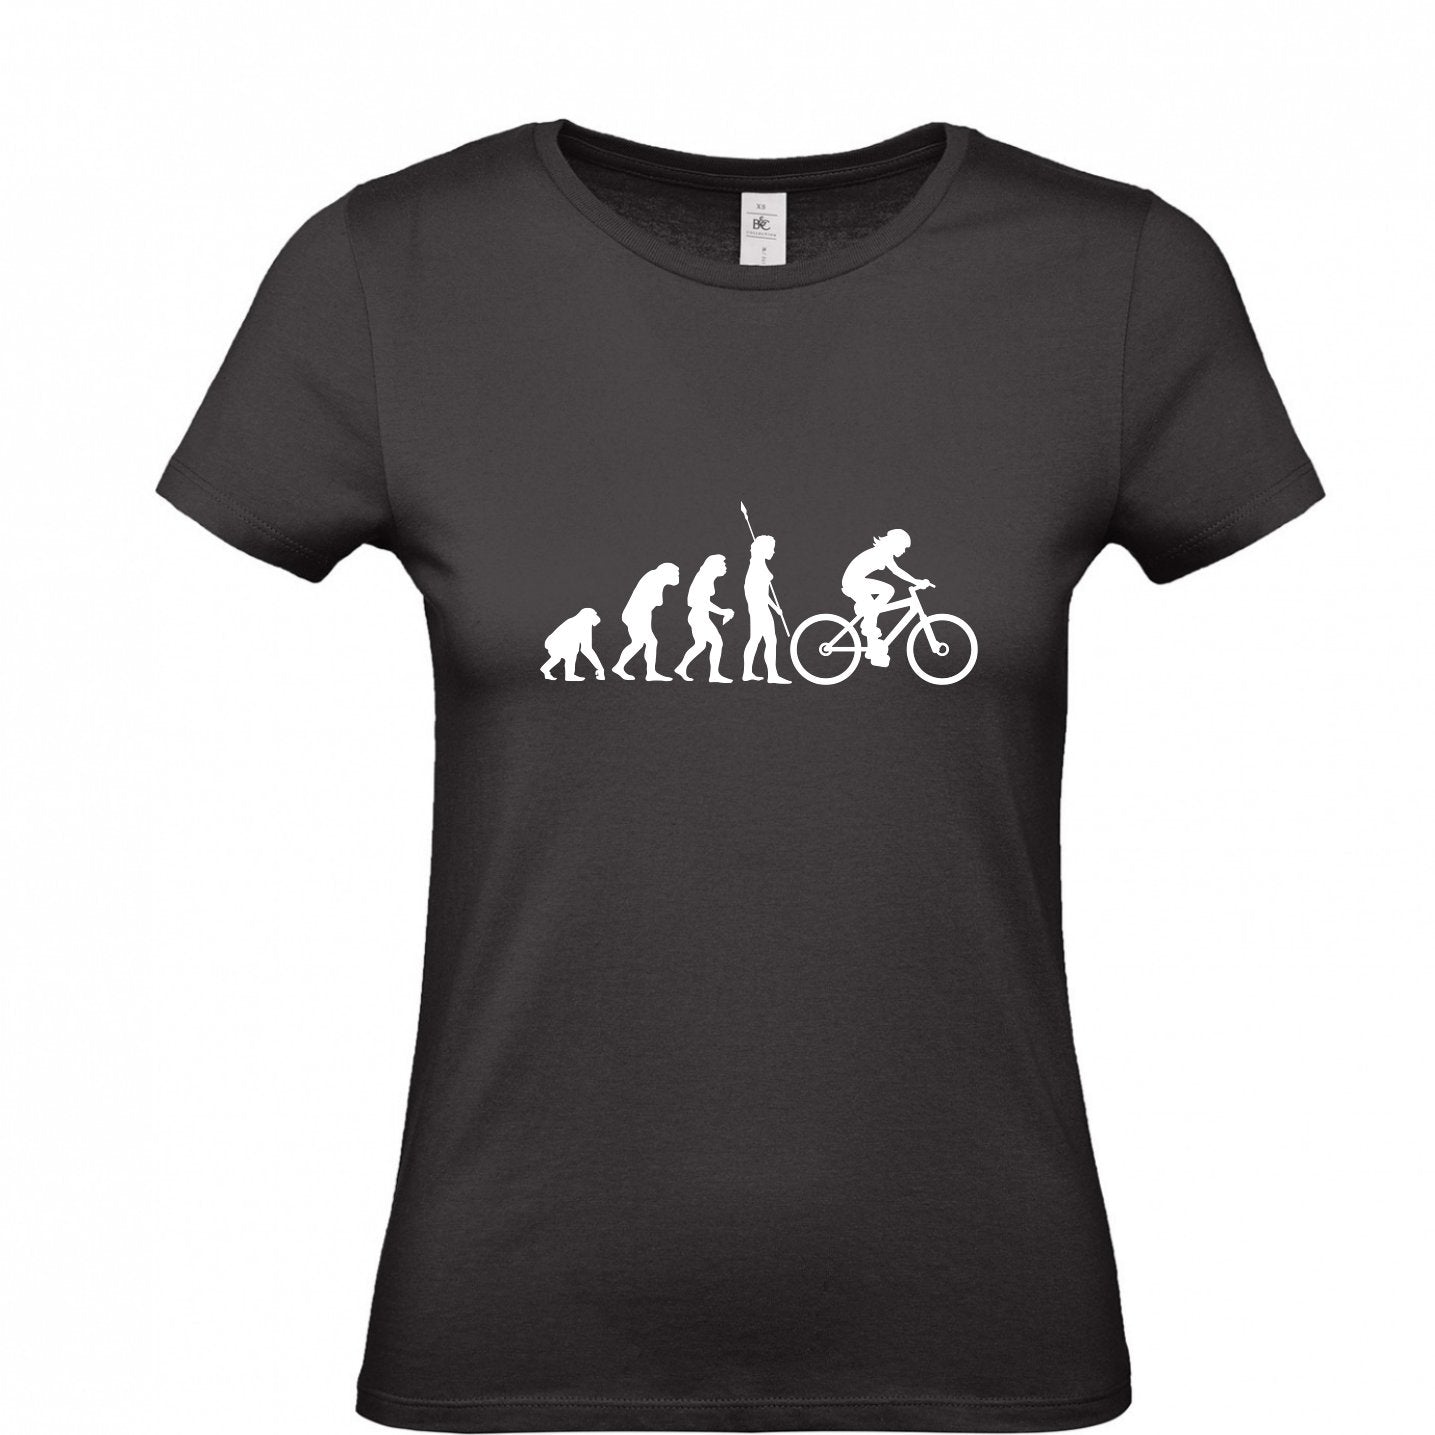 Evolution of Cycling T-Shirt for Teens/Adults - Scarf Monkey